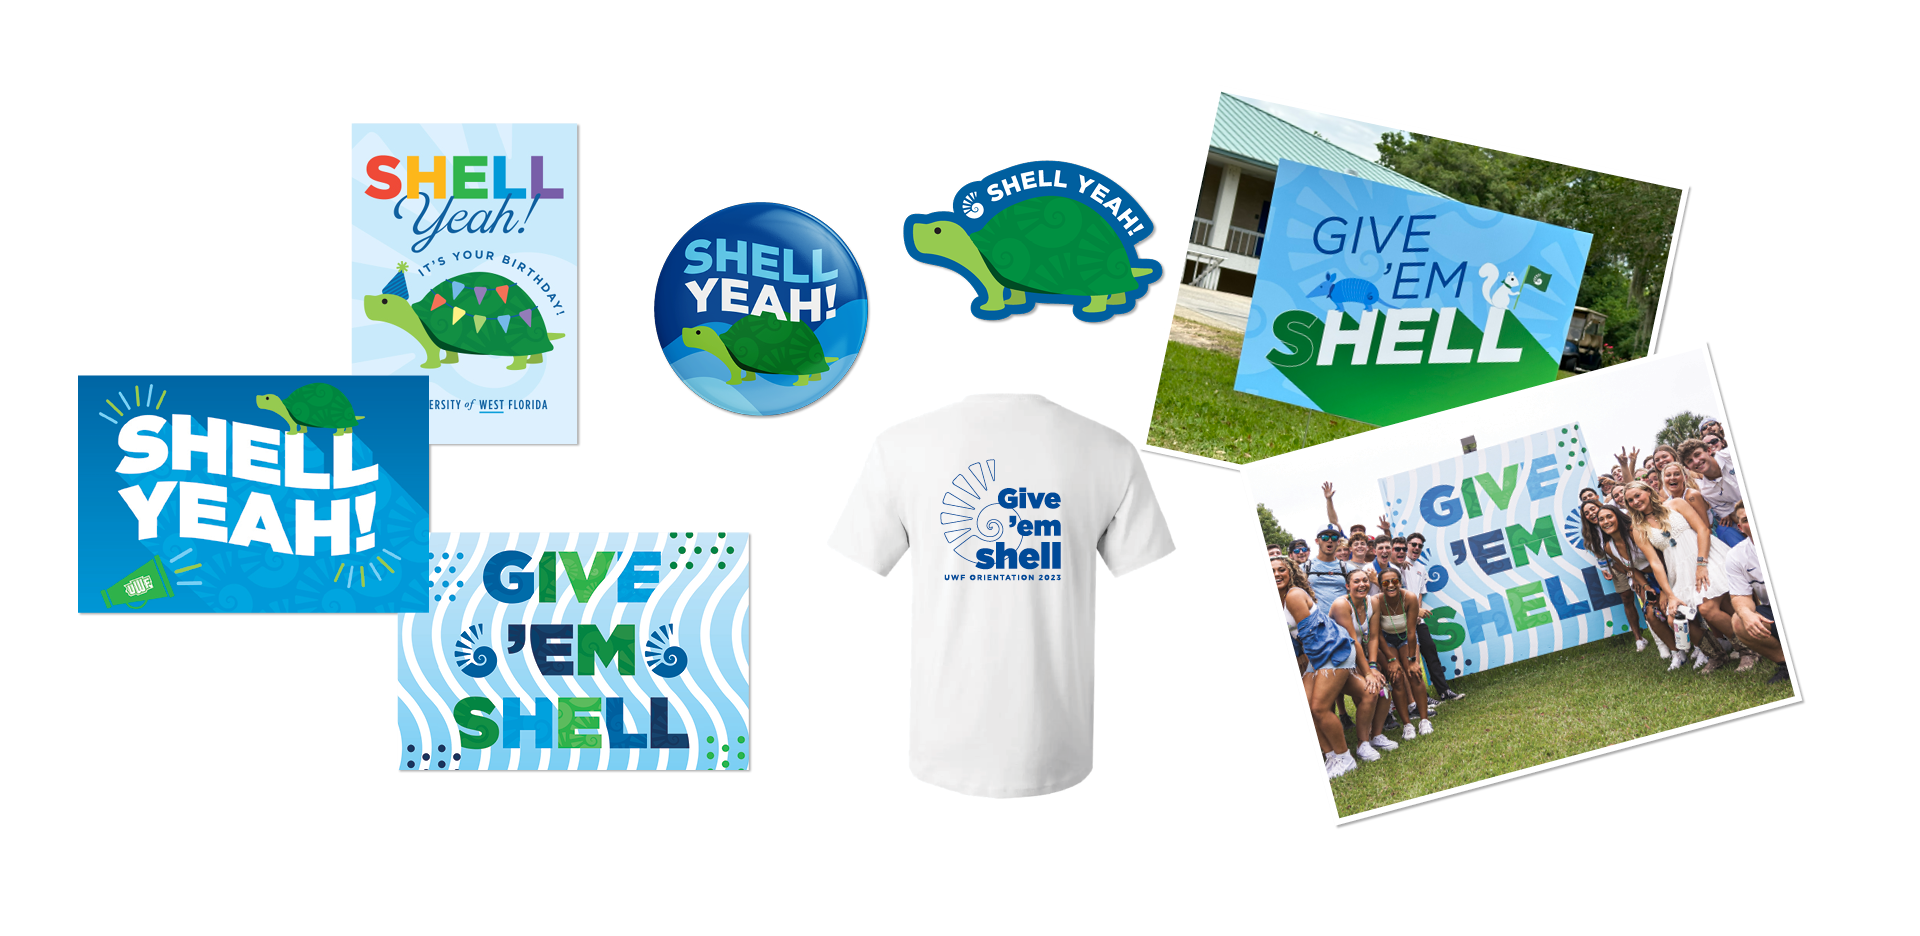 Examples of the “Give ’em Shell” and “Shell Yeah!” phrases in action